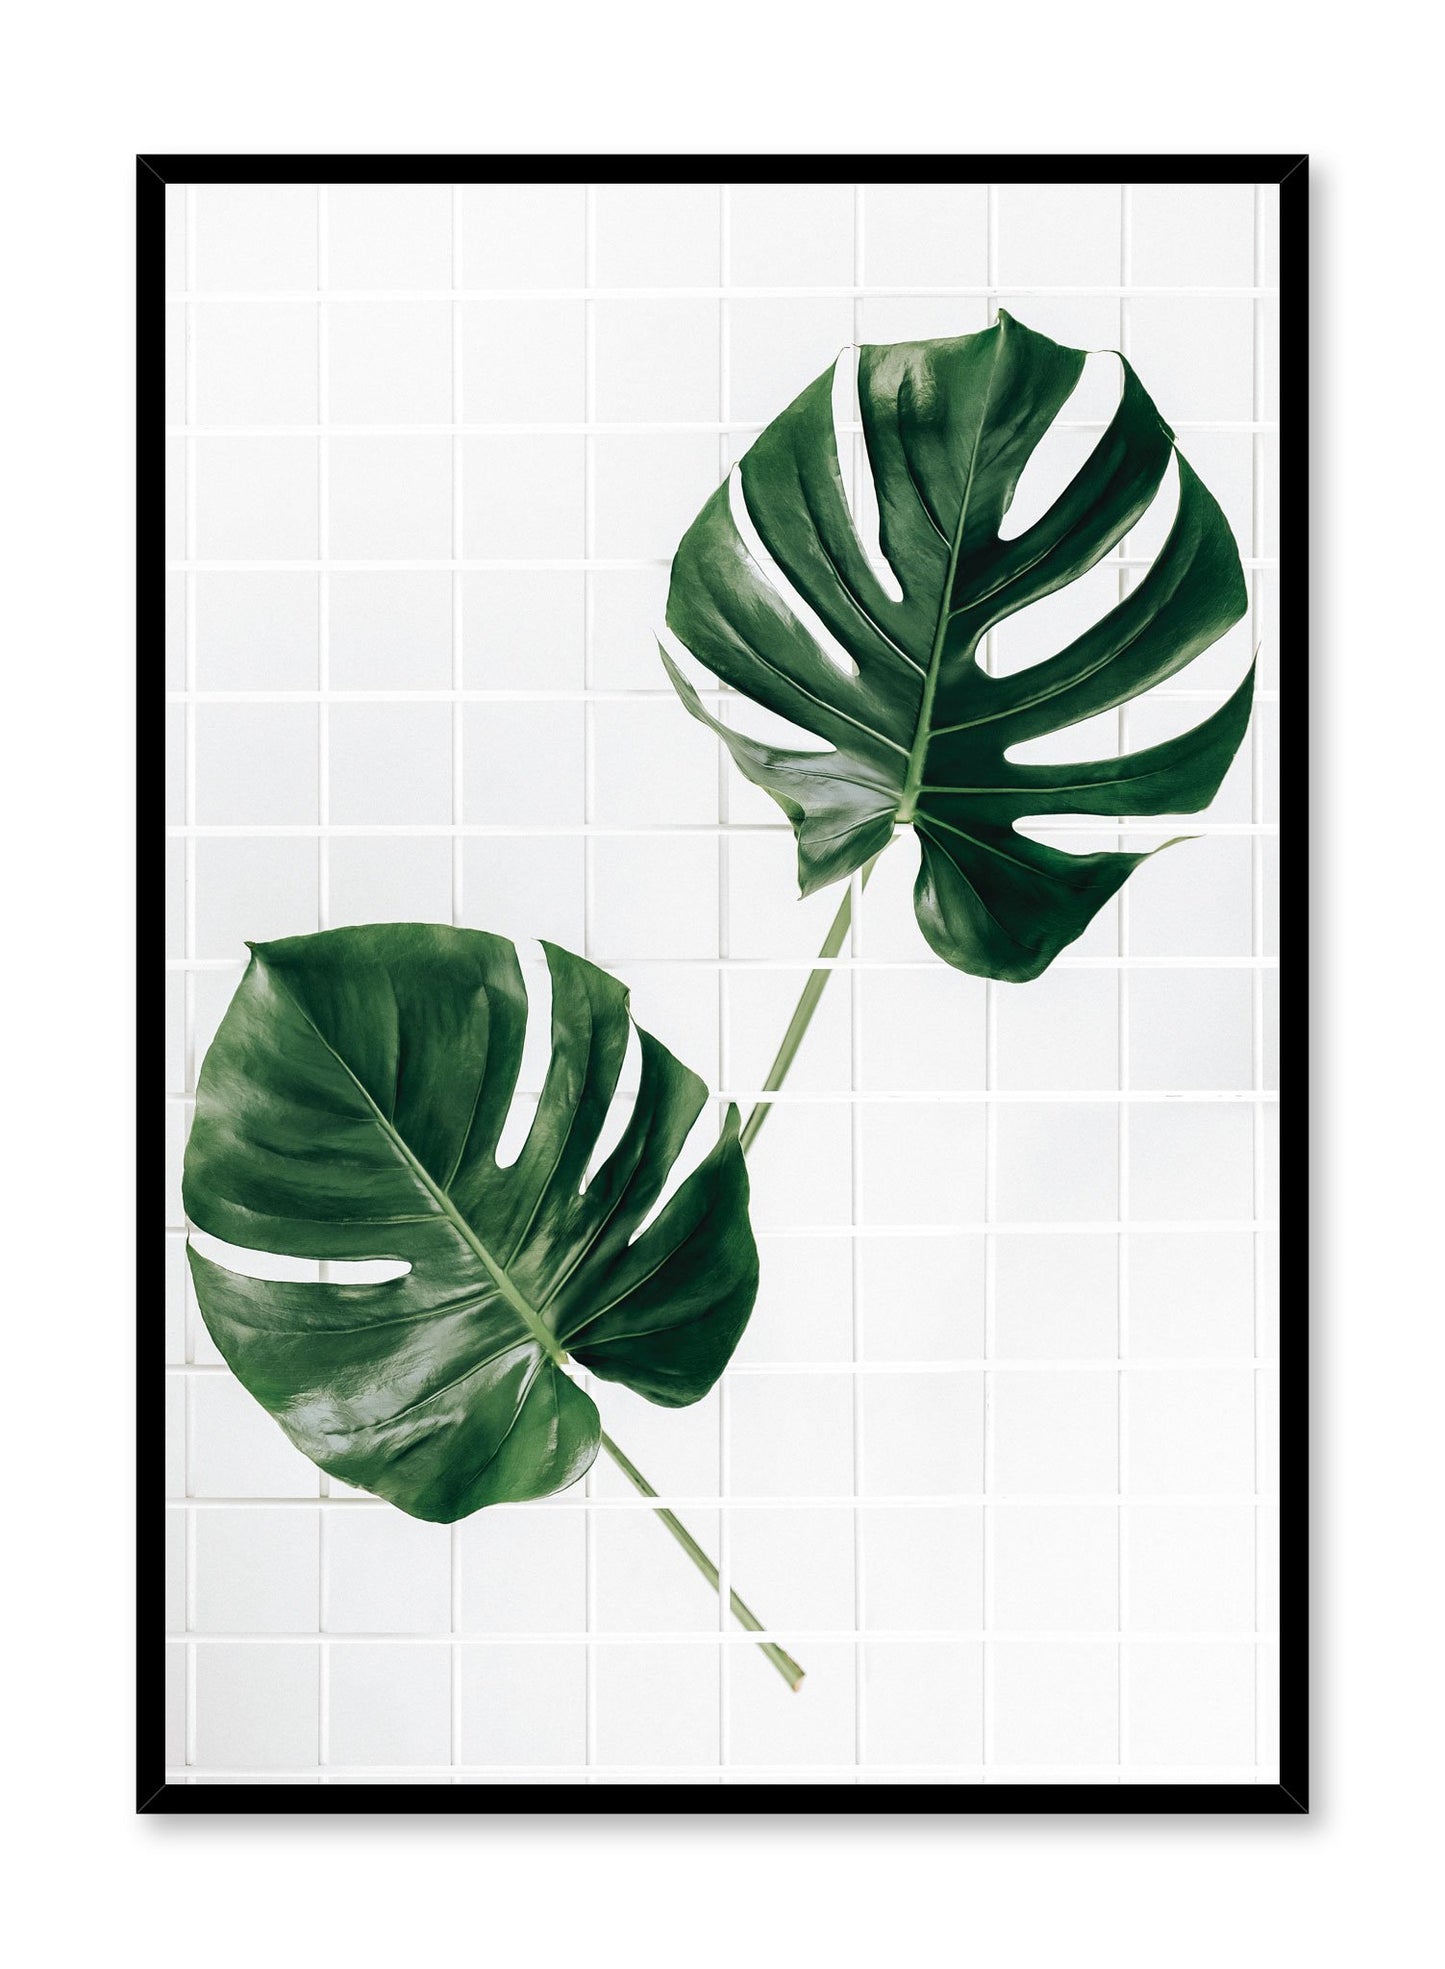 Minimalistic wall poster by Opposite Wall with Monstera Deliciosa botanical photography